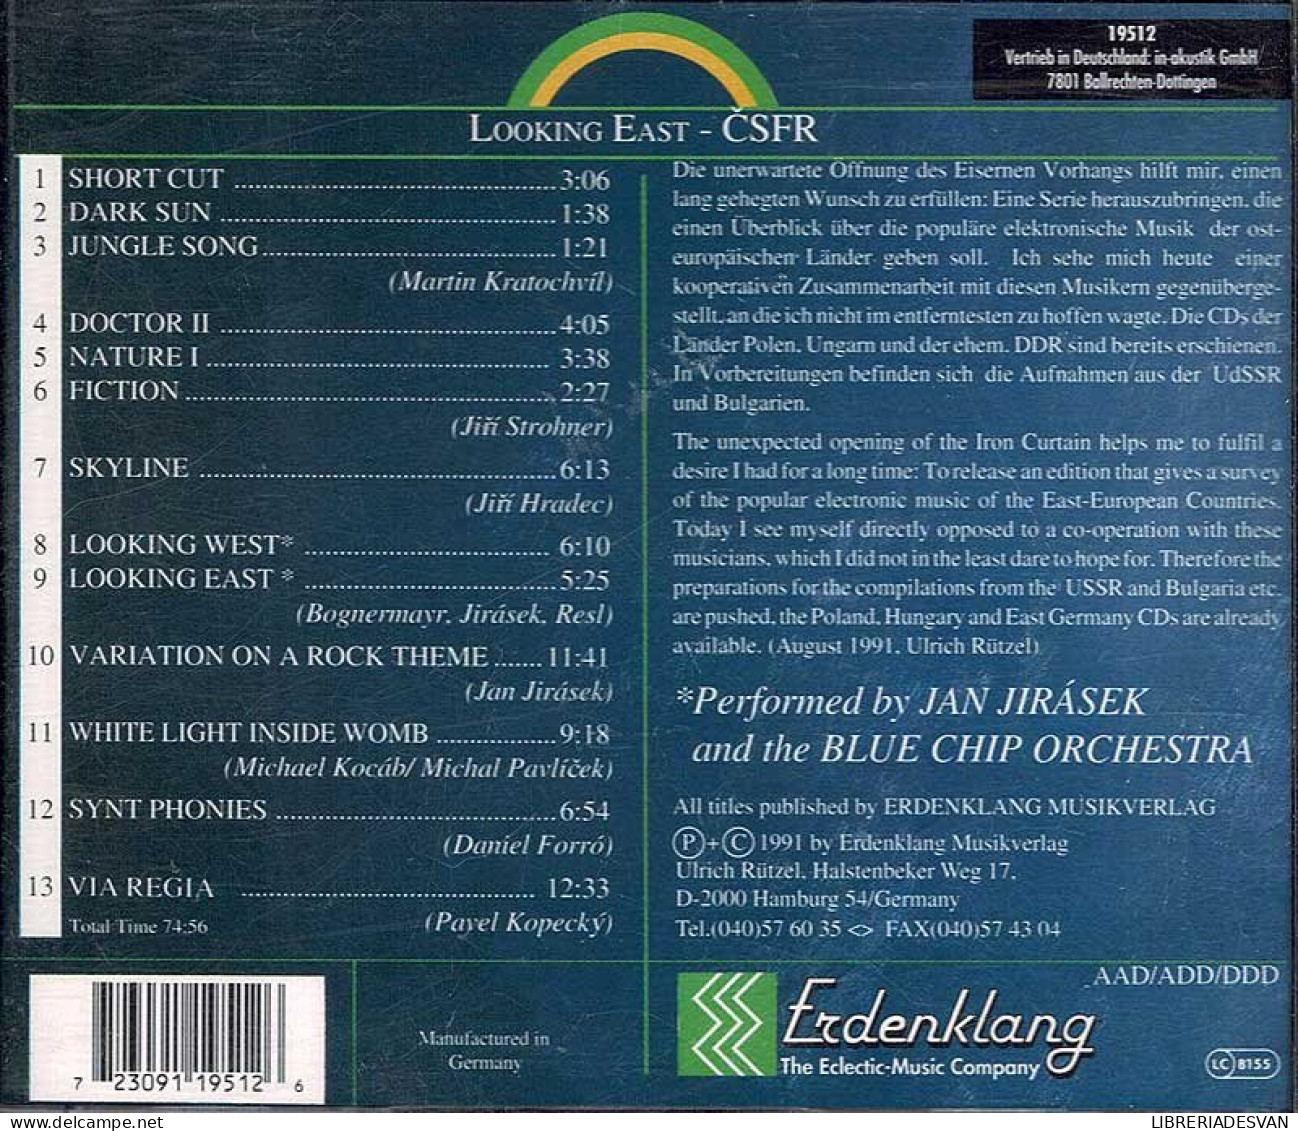 Looking East - Electronic East - Synthesizer Music From CSFR. CD - Dance, Techno & House